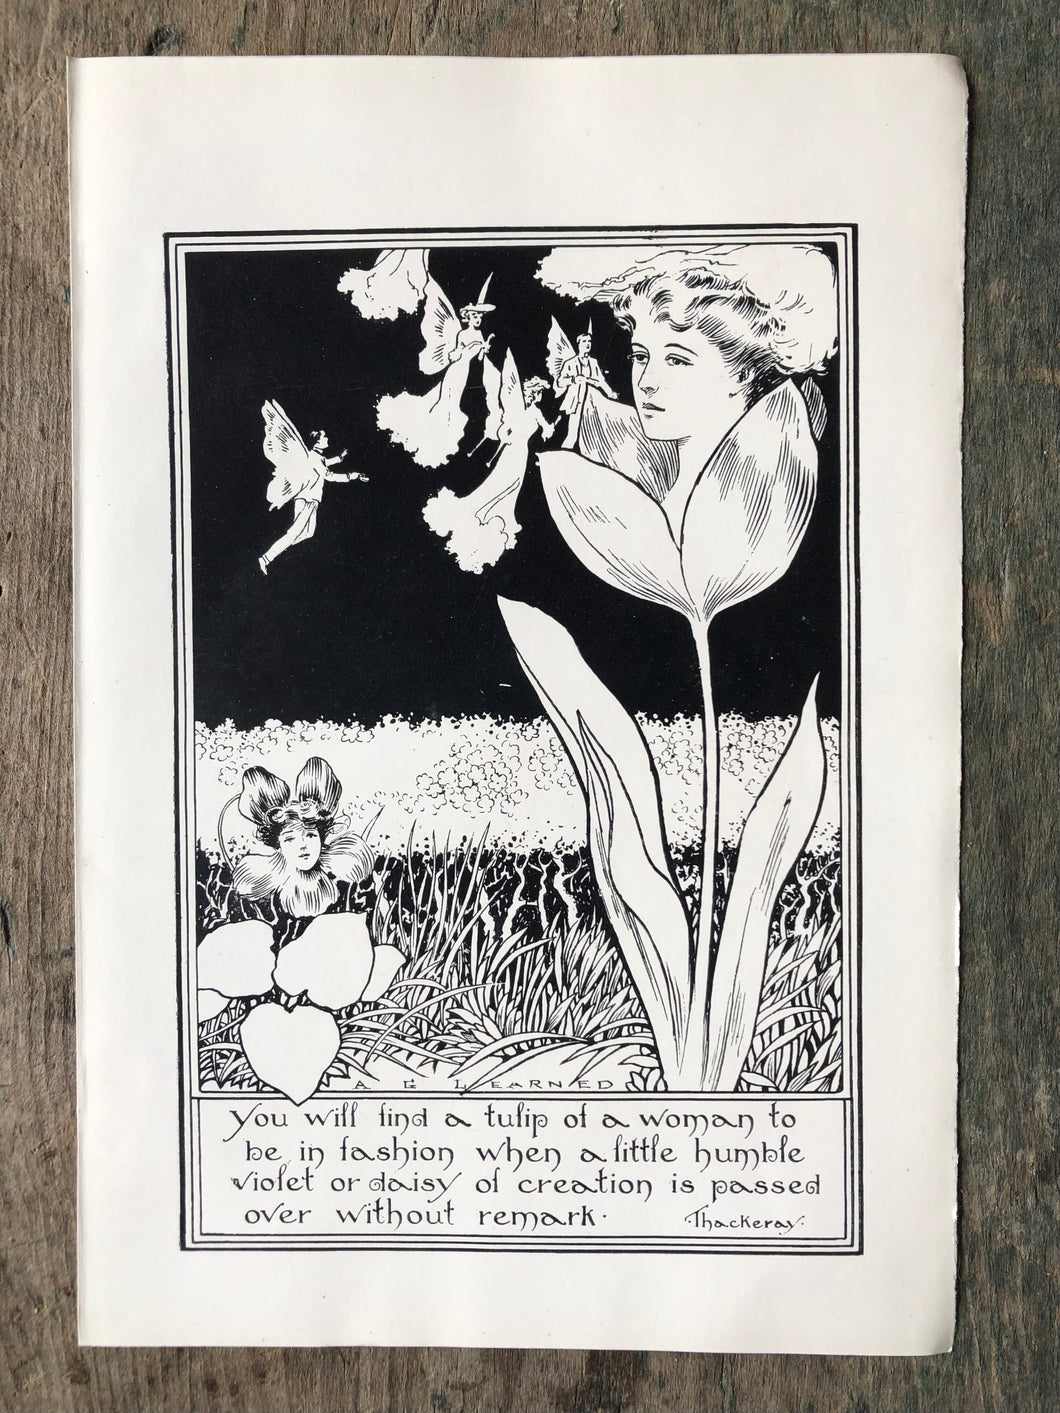 Thackeray Quote Print illustrated by Arthur G. Learned from “Eve’s Daughter”